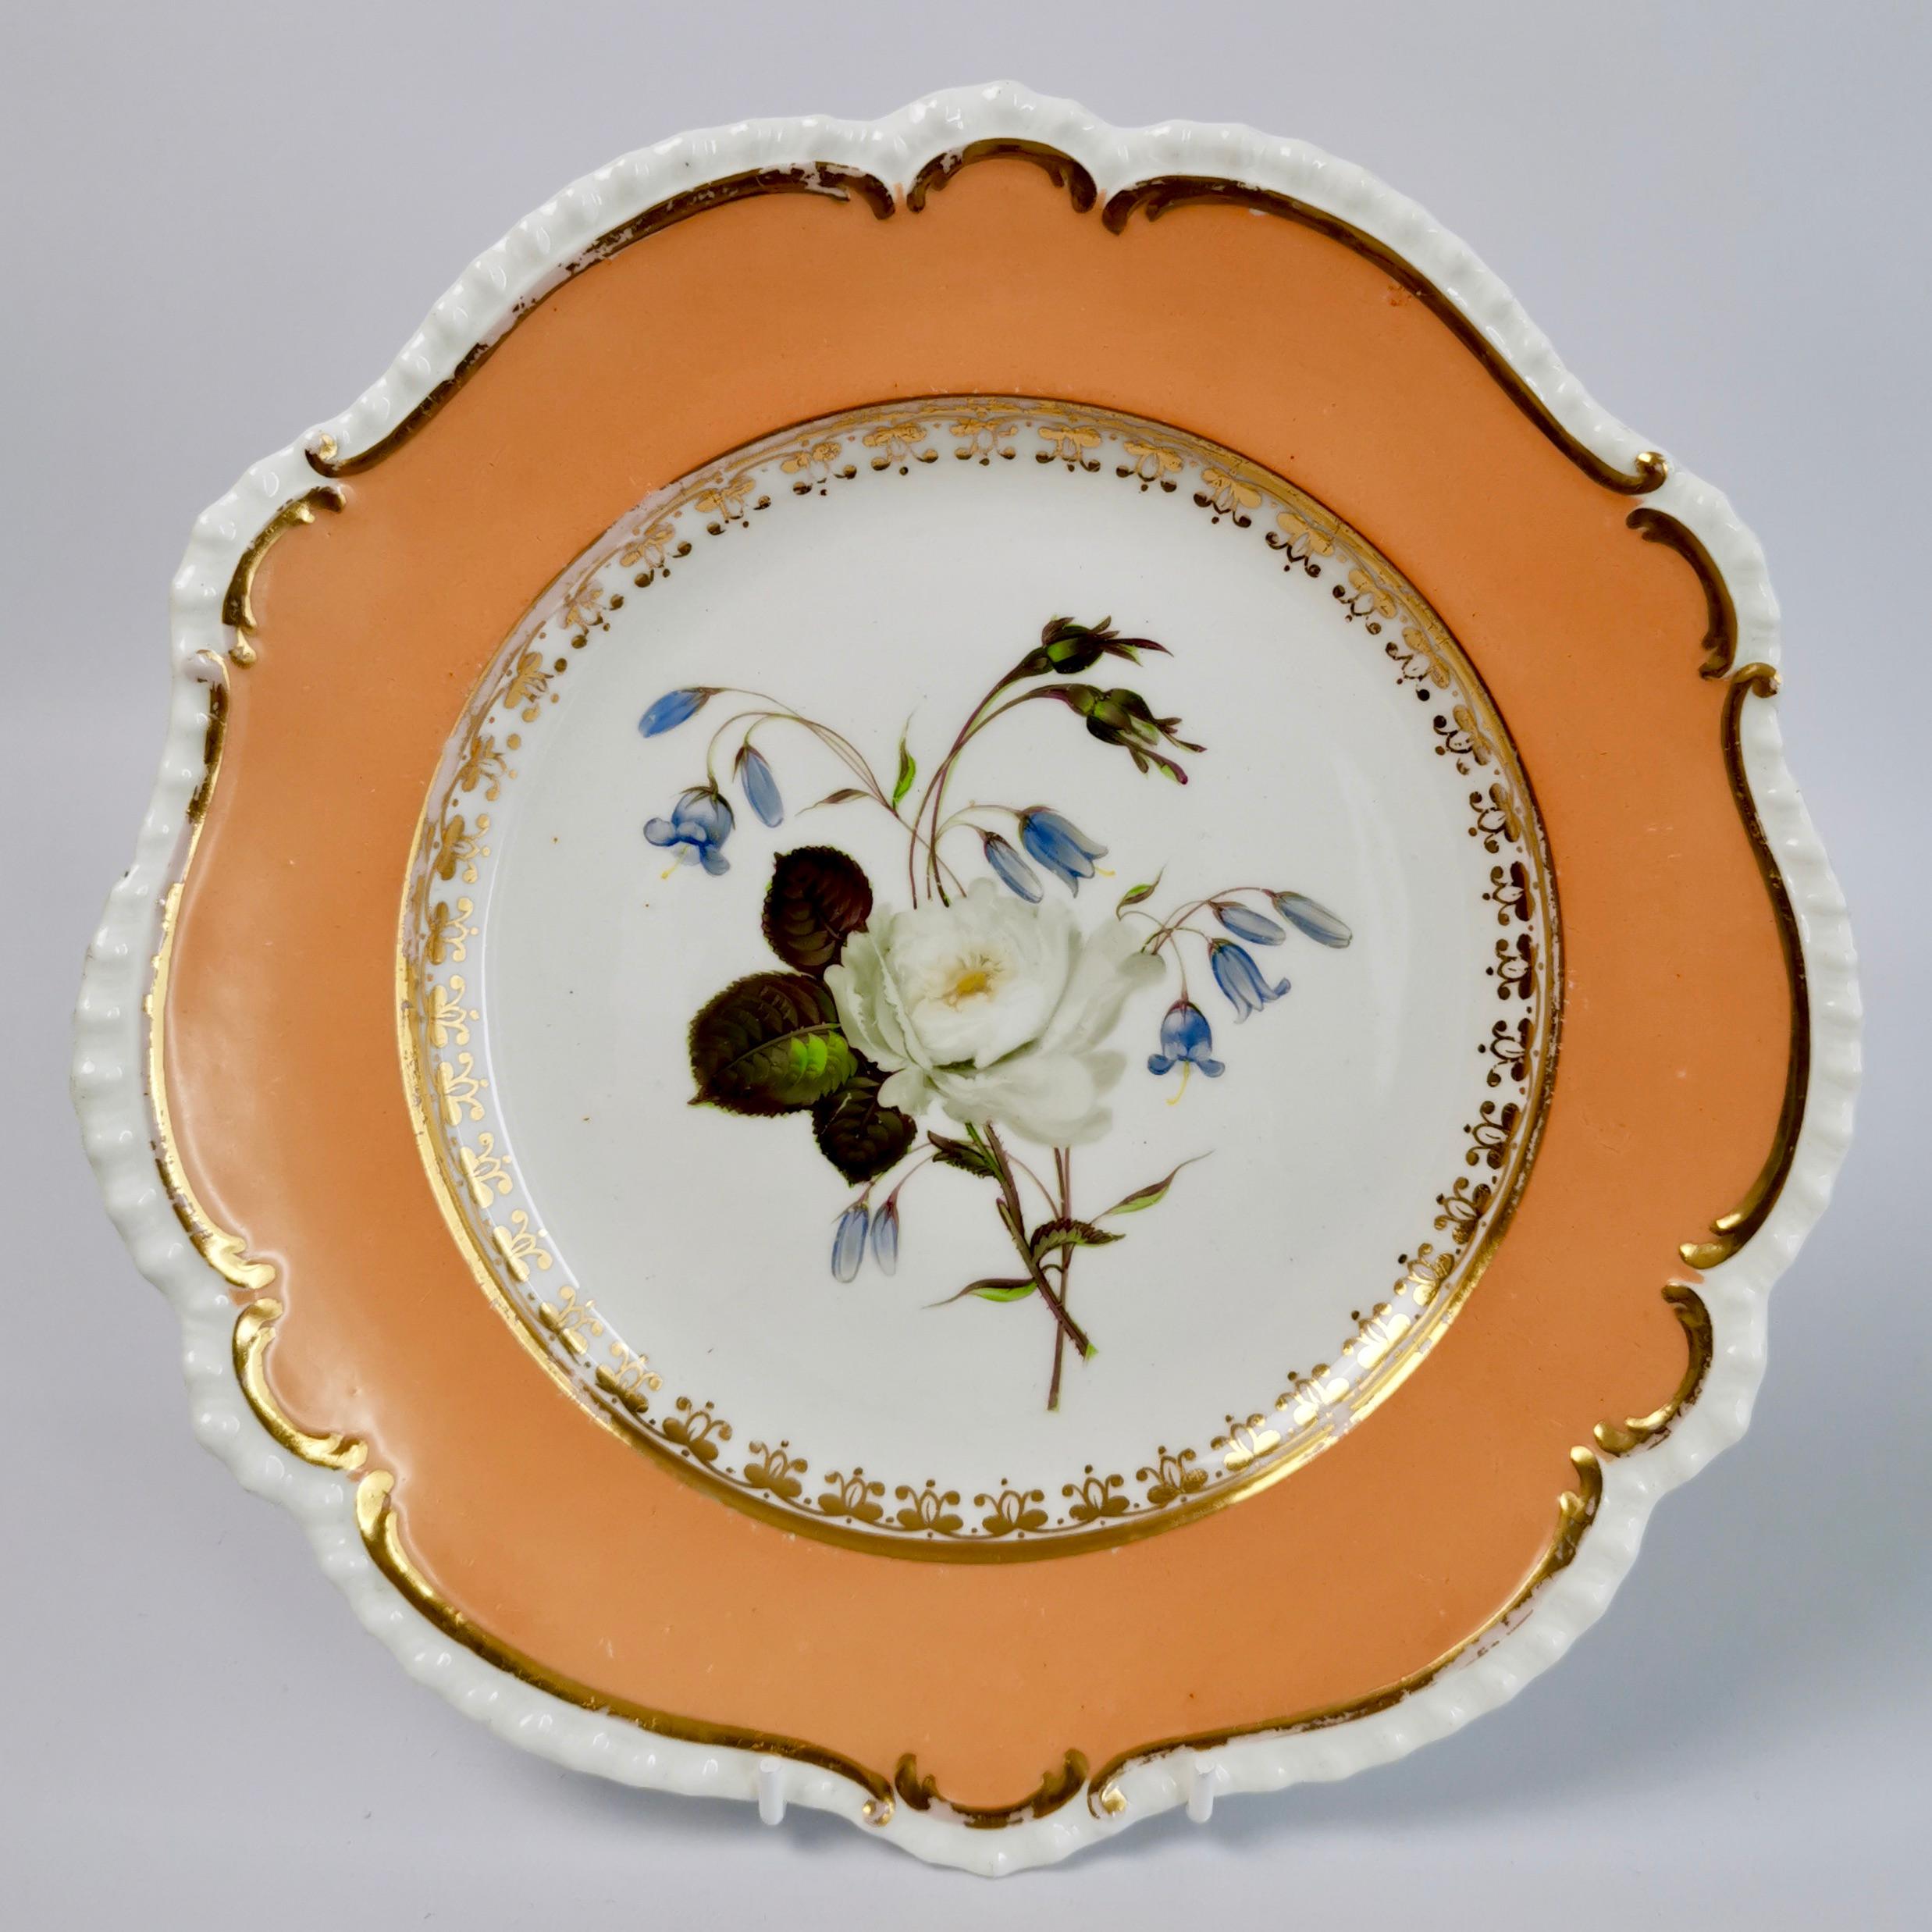 Early 19th Century Coalport Set of 4 Plates, Peach with Flowers, Porcelain, Regency 1820-1825